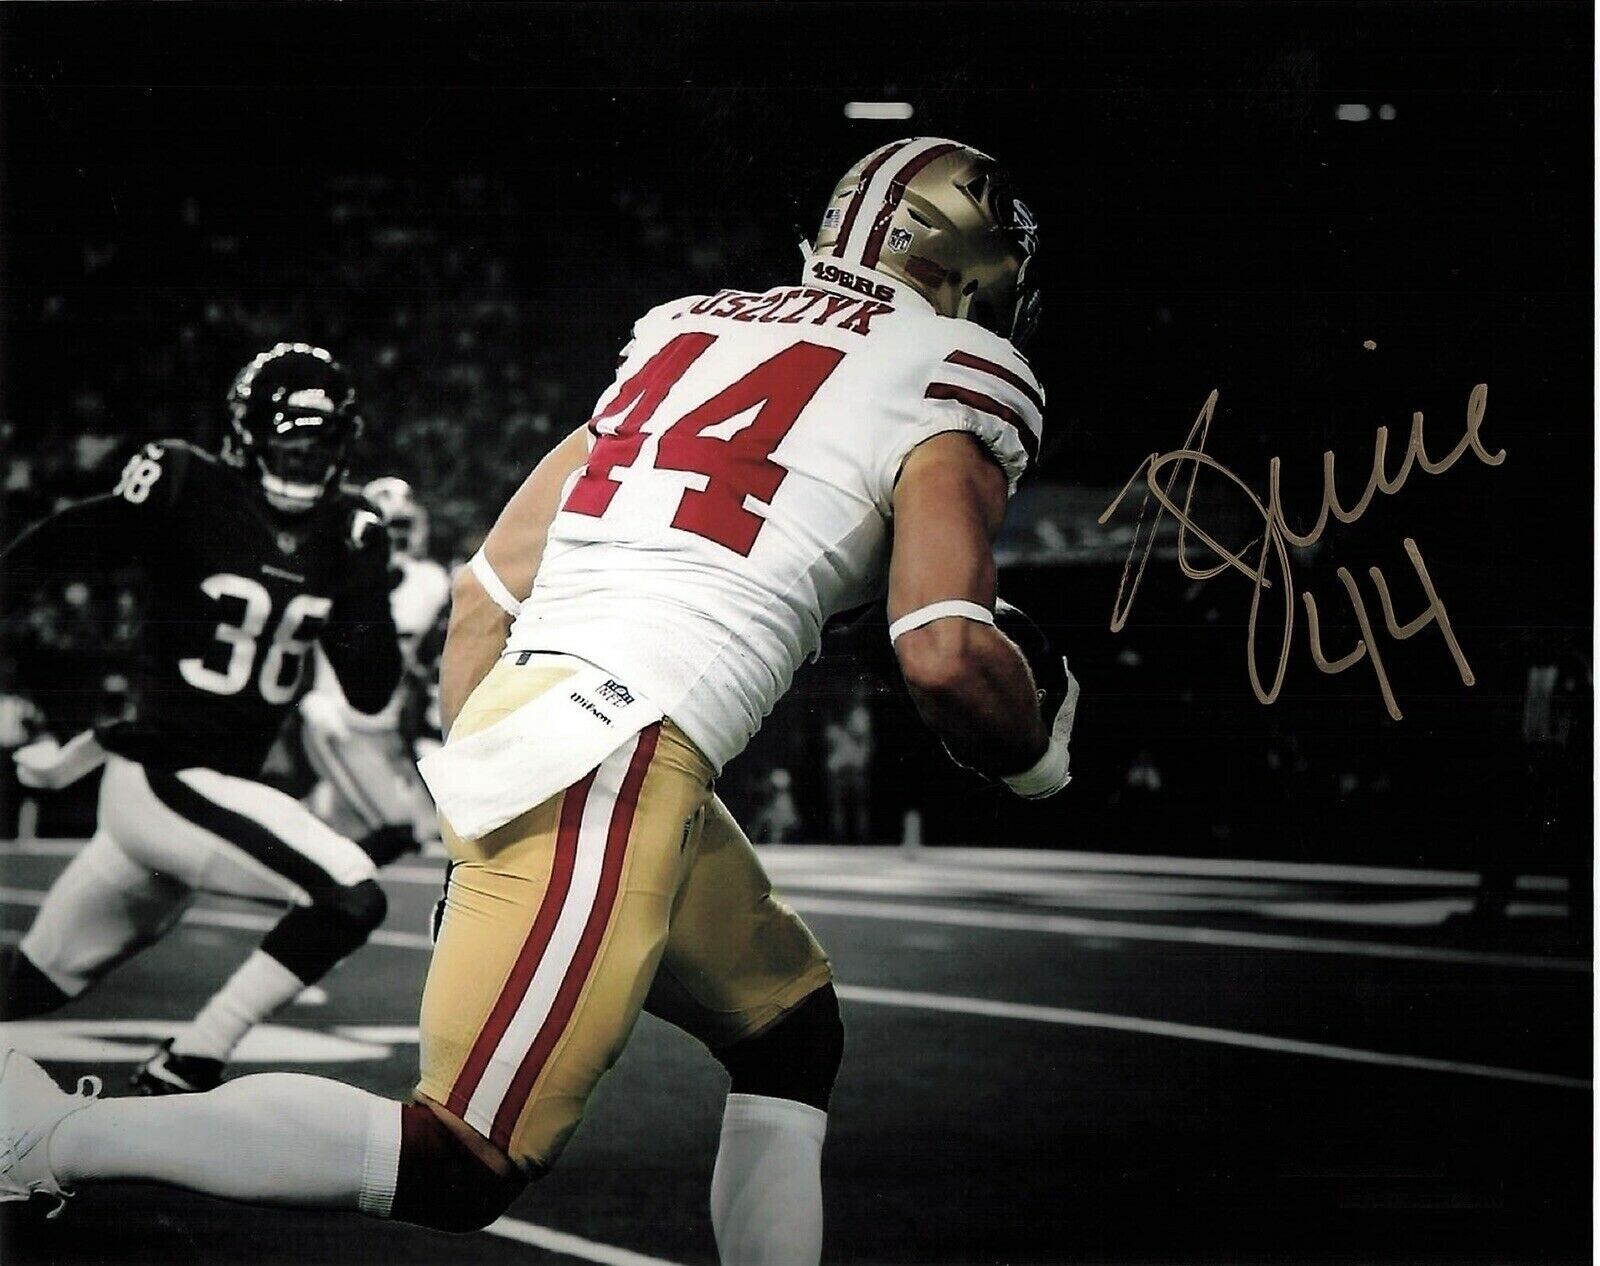 Kyle Juszczyk Autographed Signed 8x10 Photo Poster painting ( 49ers ) REPRINT